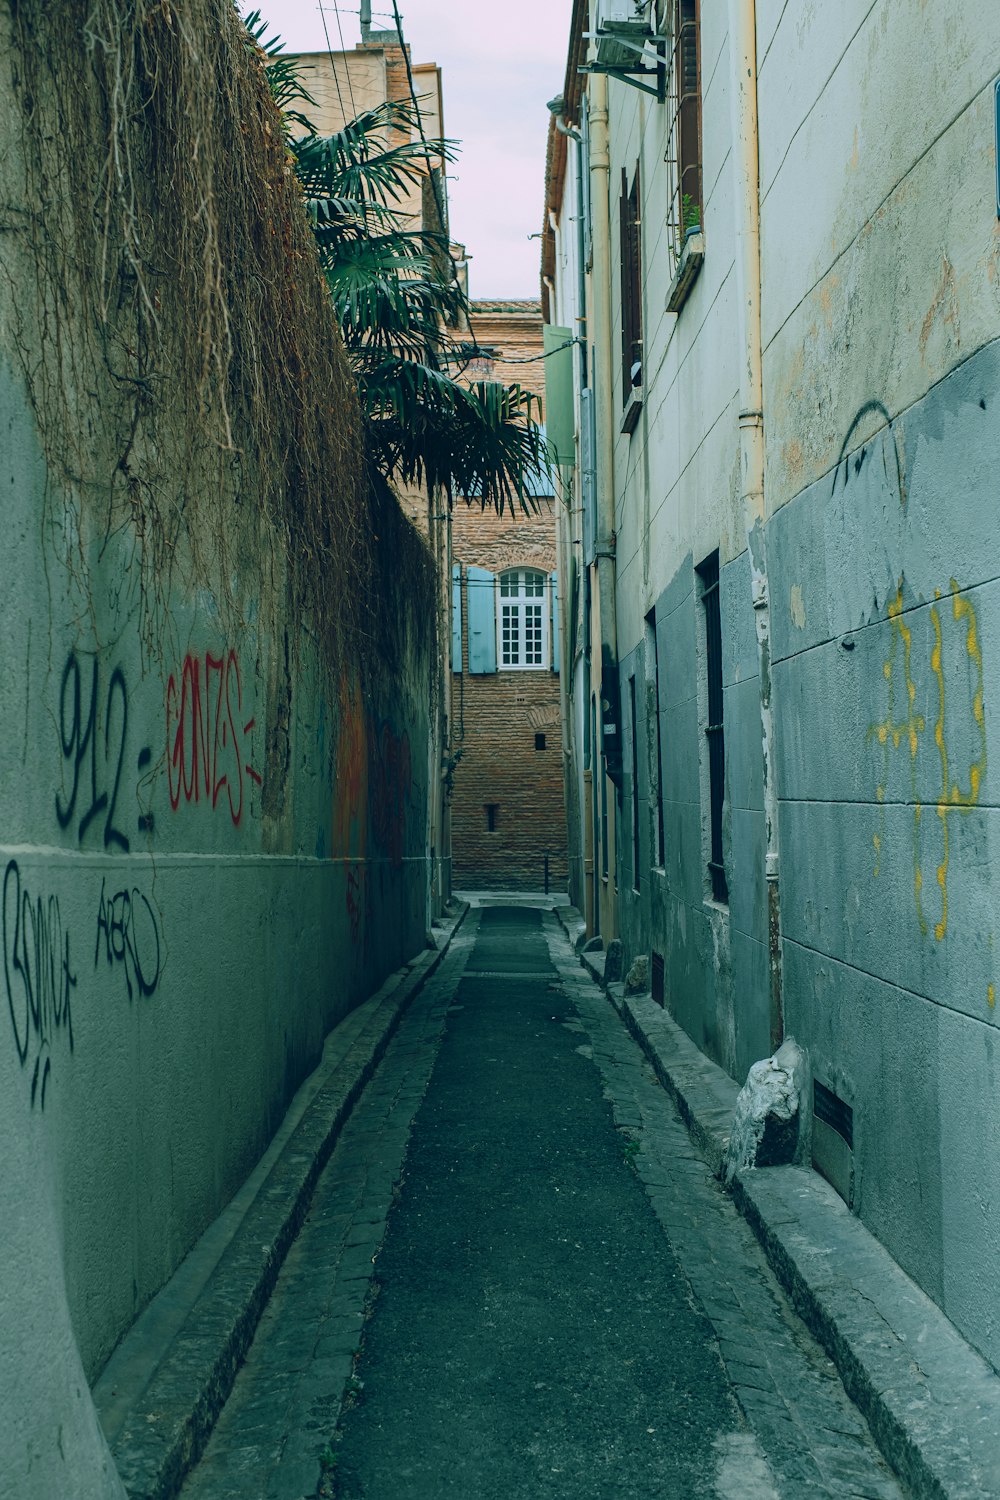 a narrow alley with graffiti on the walls